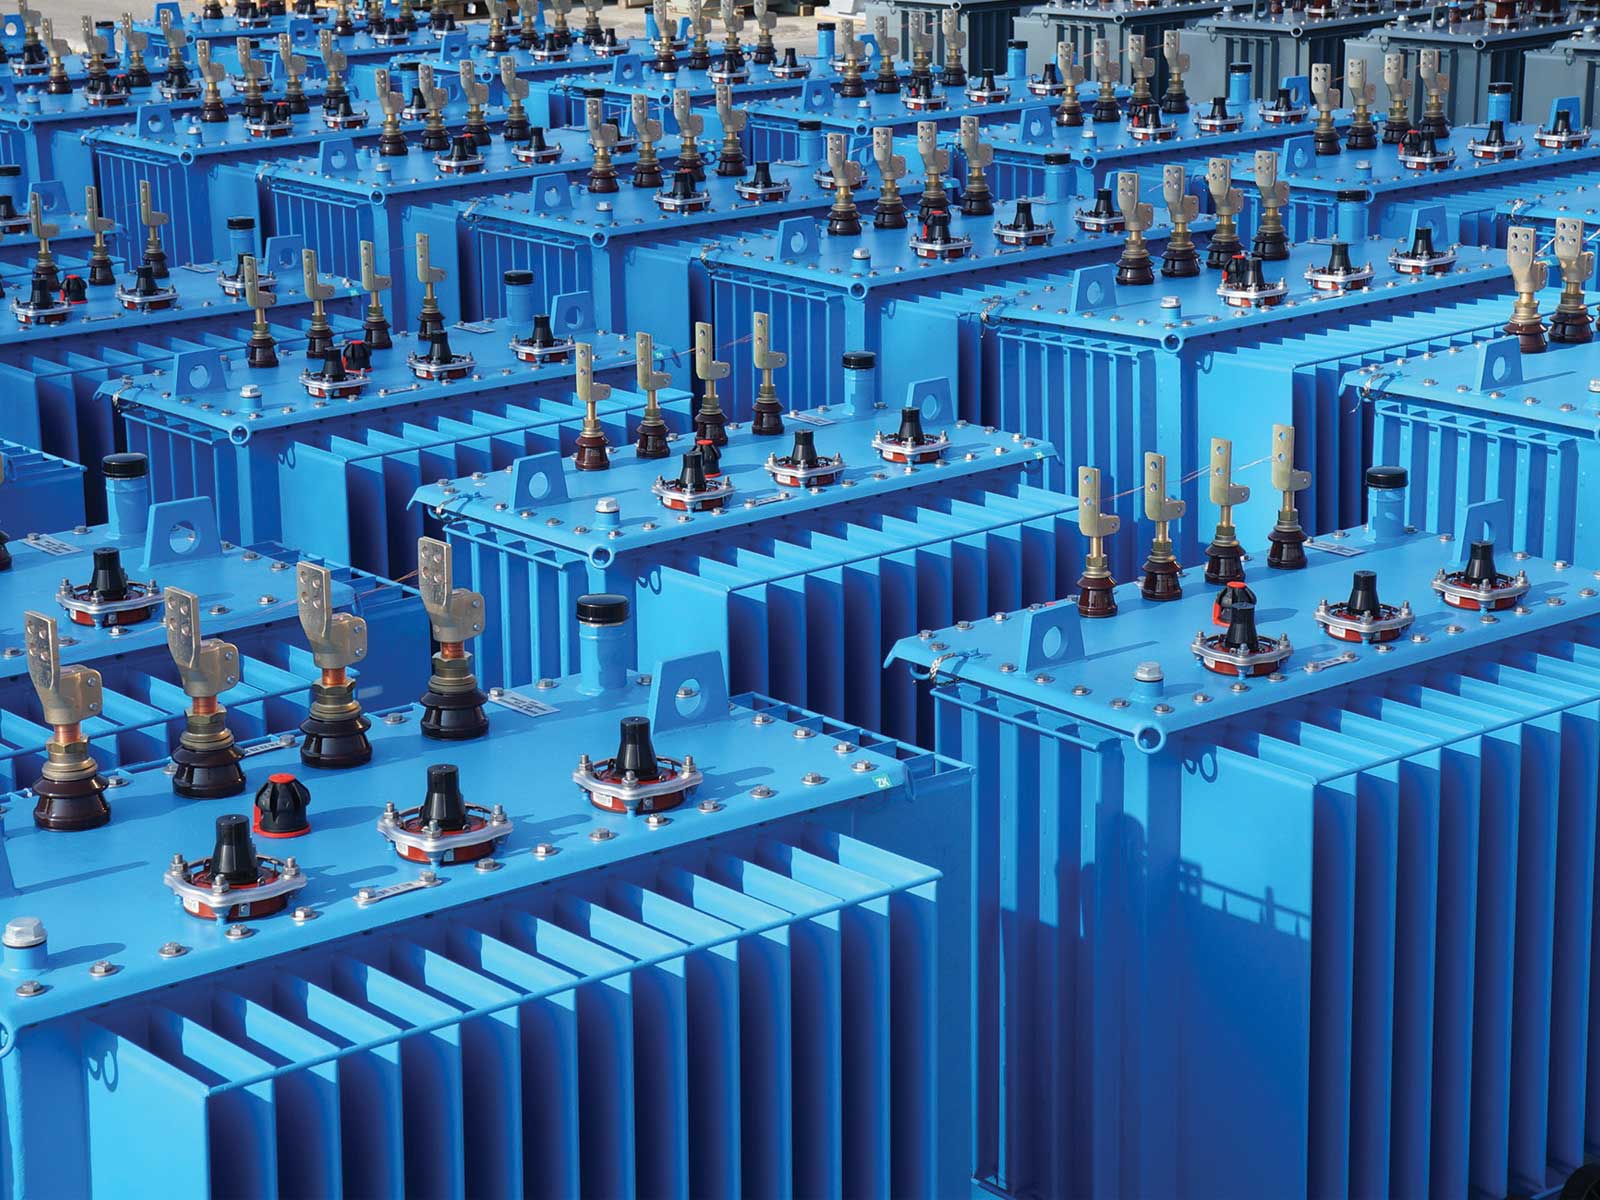 Oil immersed distribution transformers